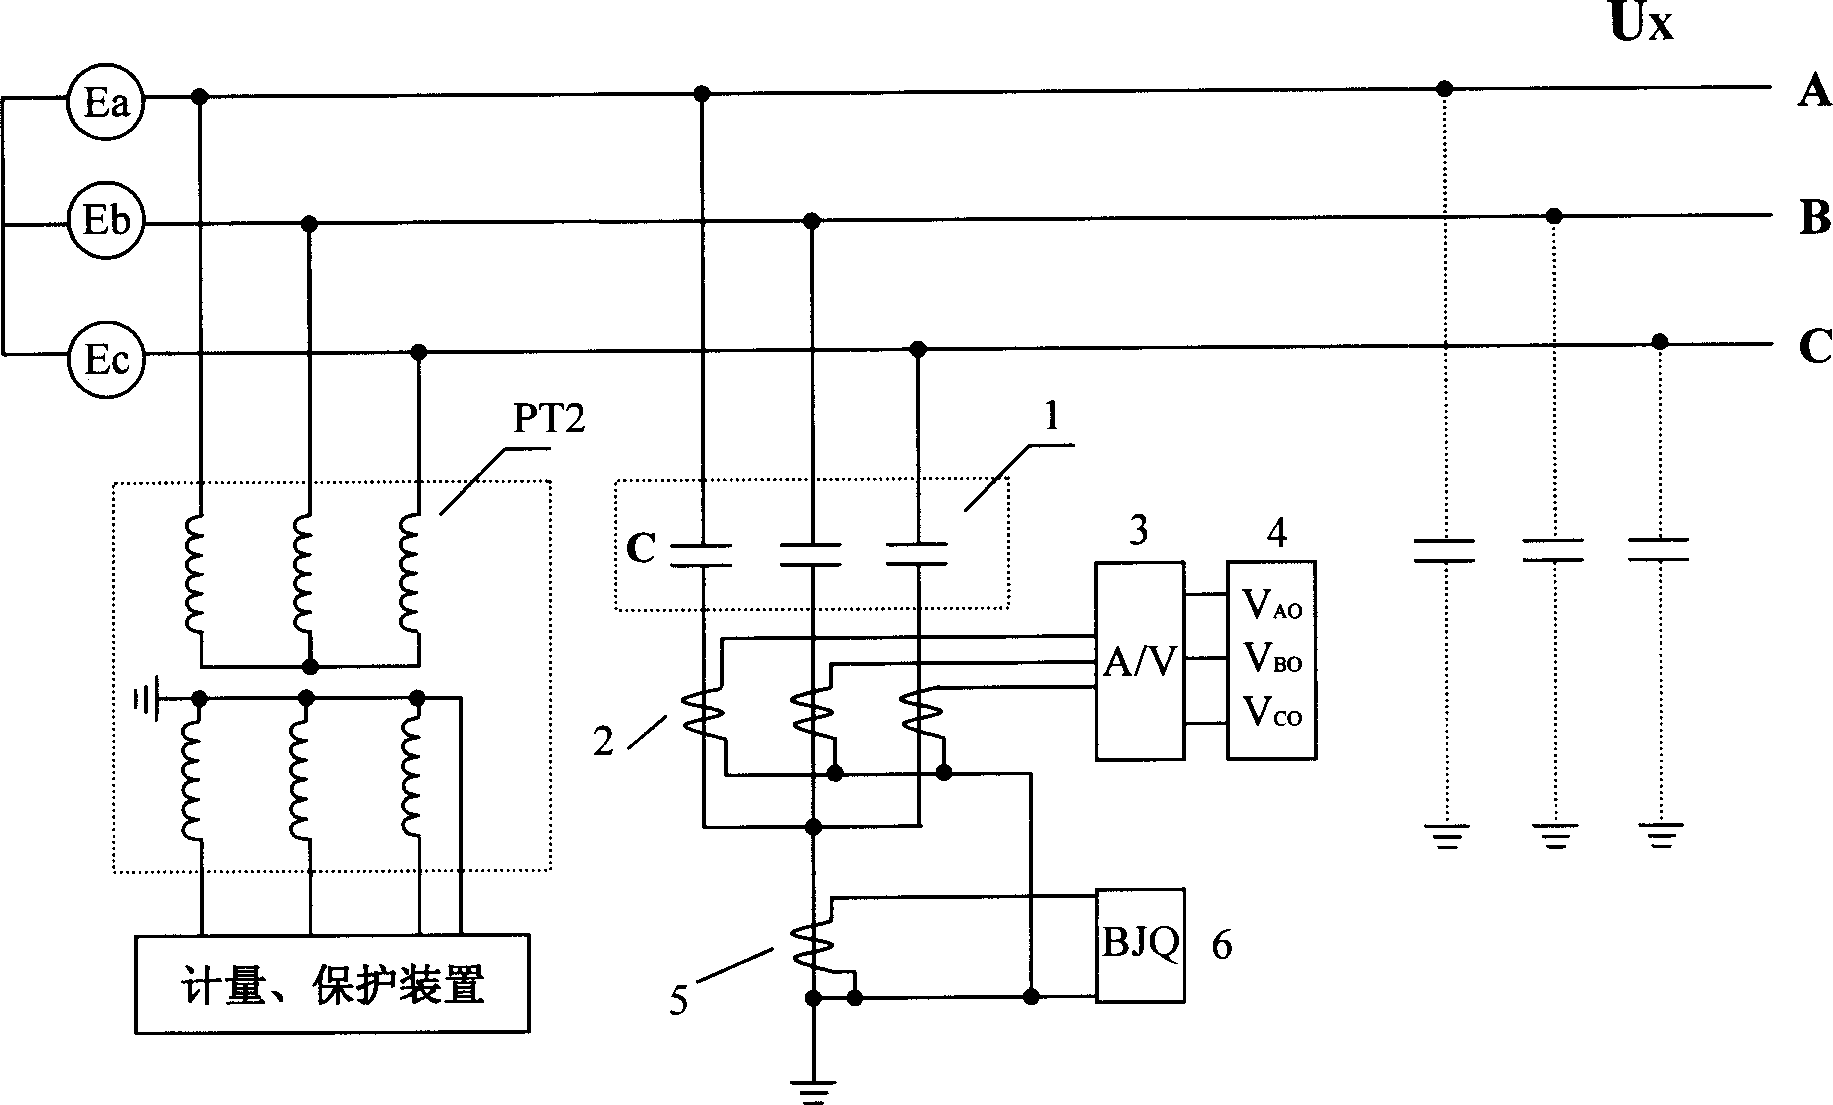 Insulation monitoring method for low current neutral grounding systems and apparatus for realizing the method